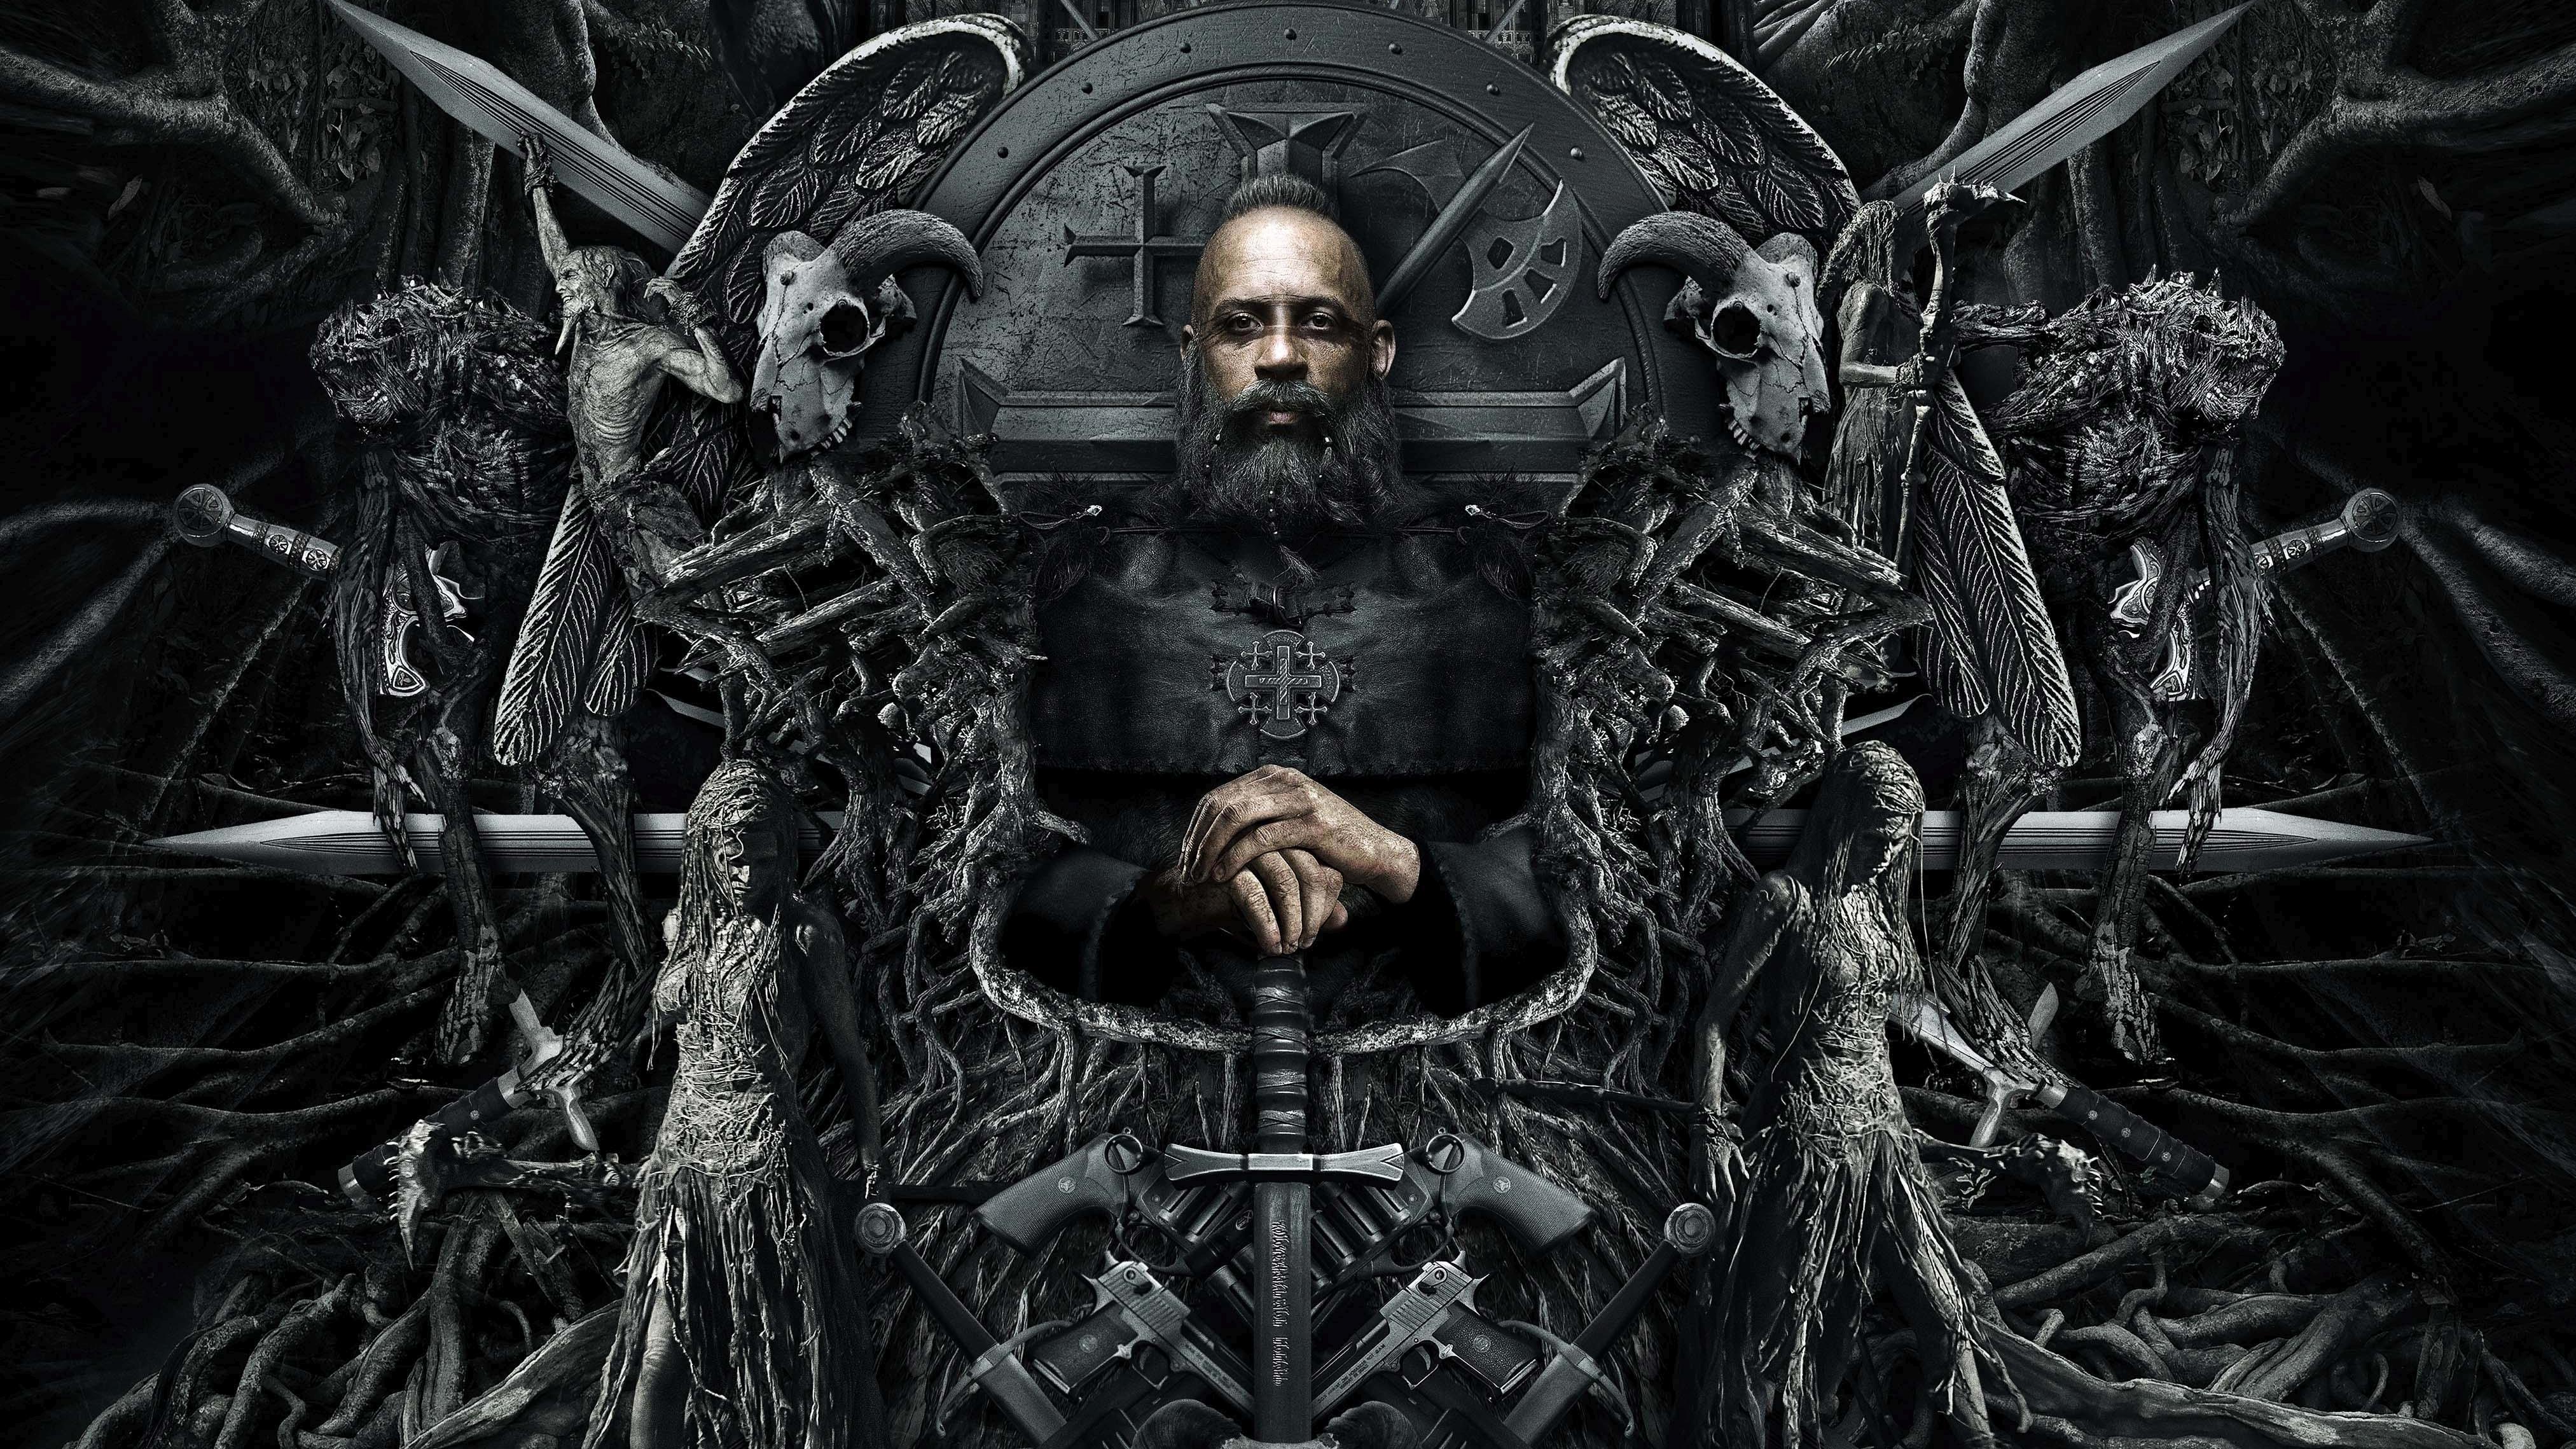 The Last Witch Hunter Wallpaper For Android